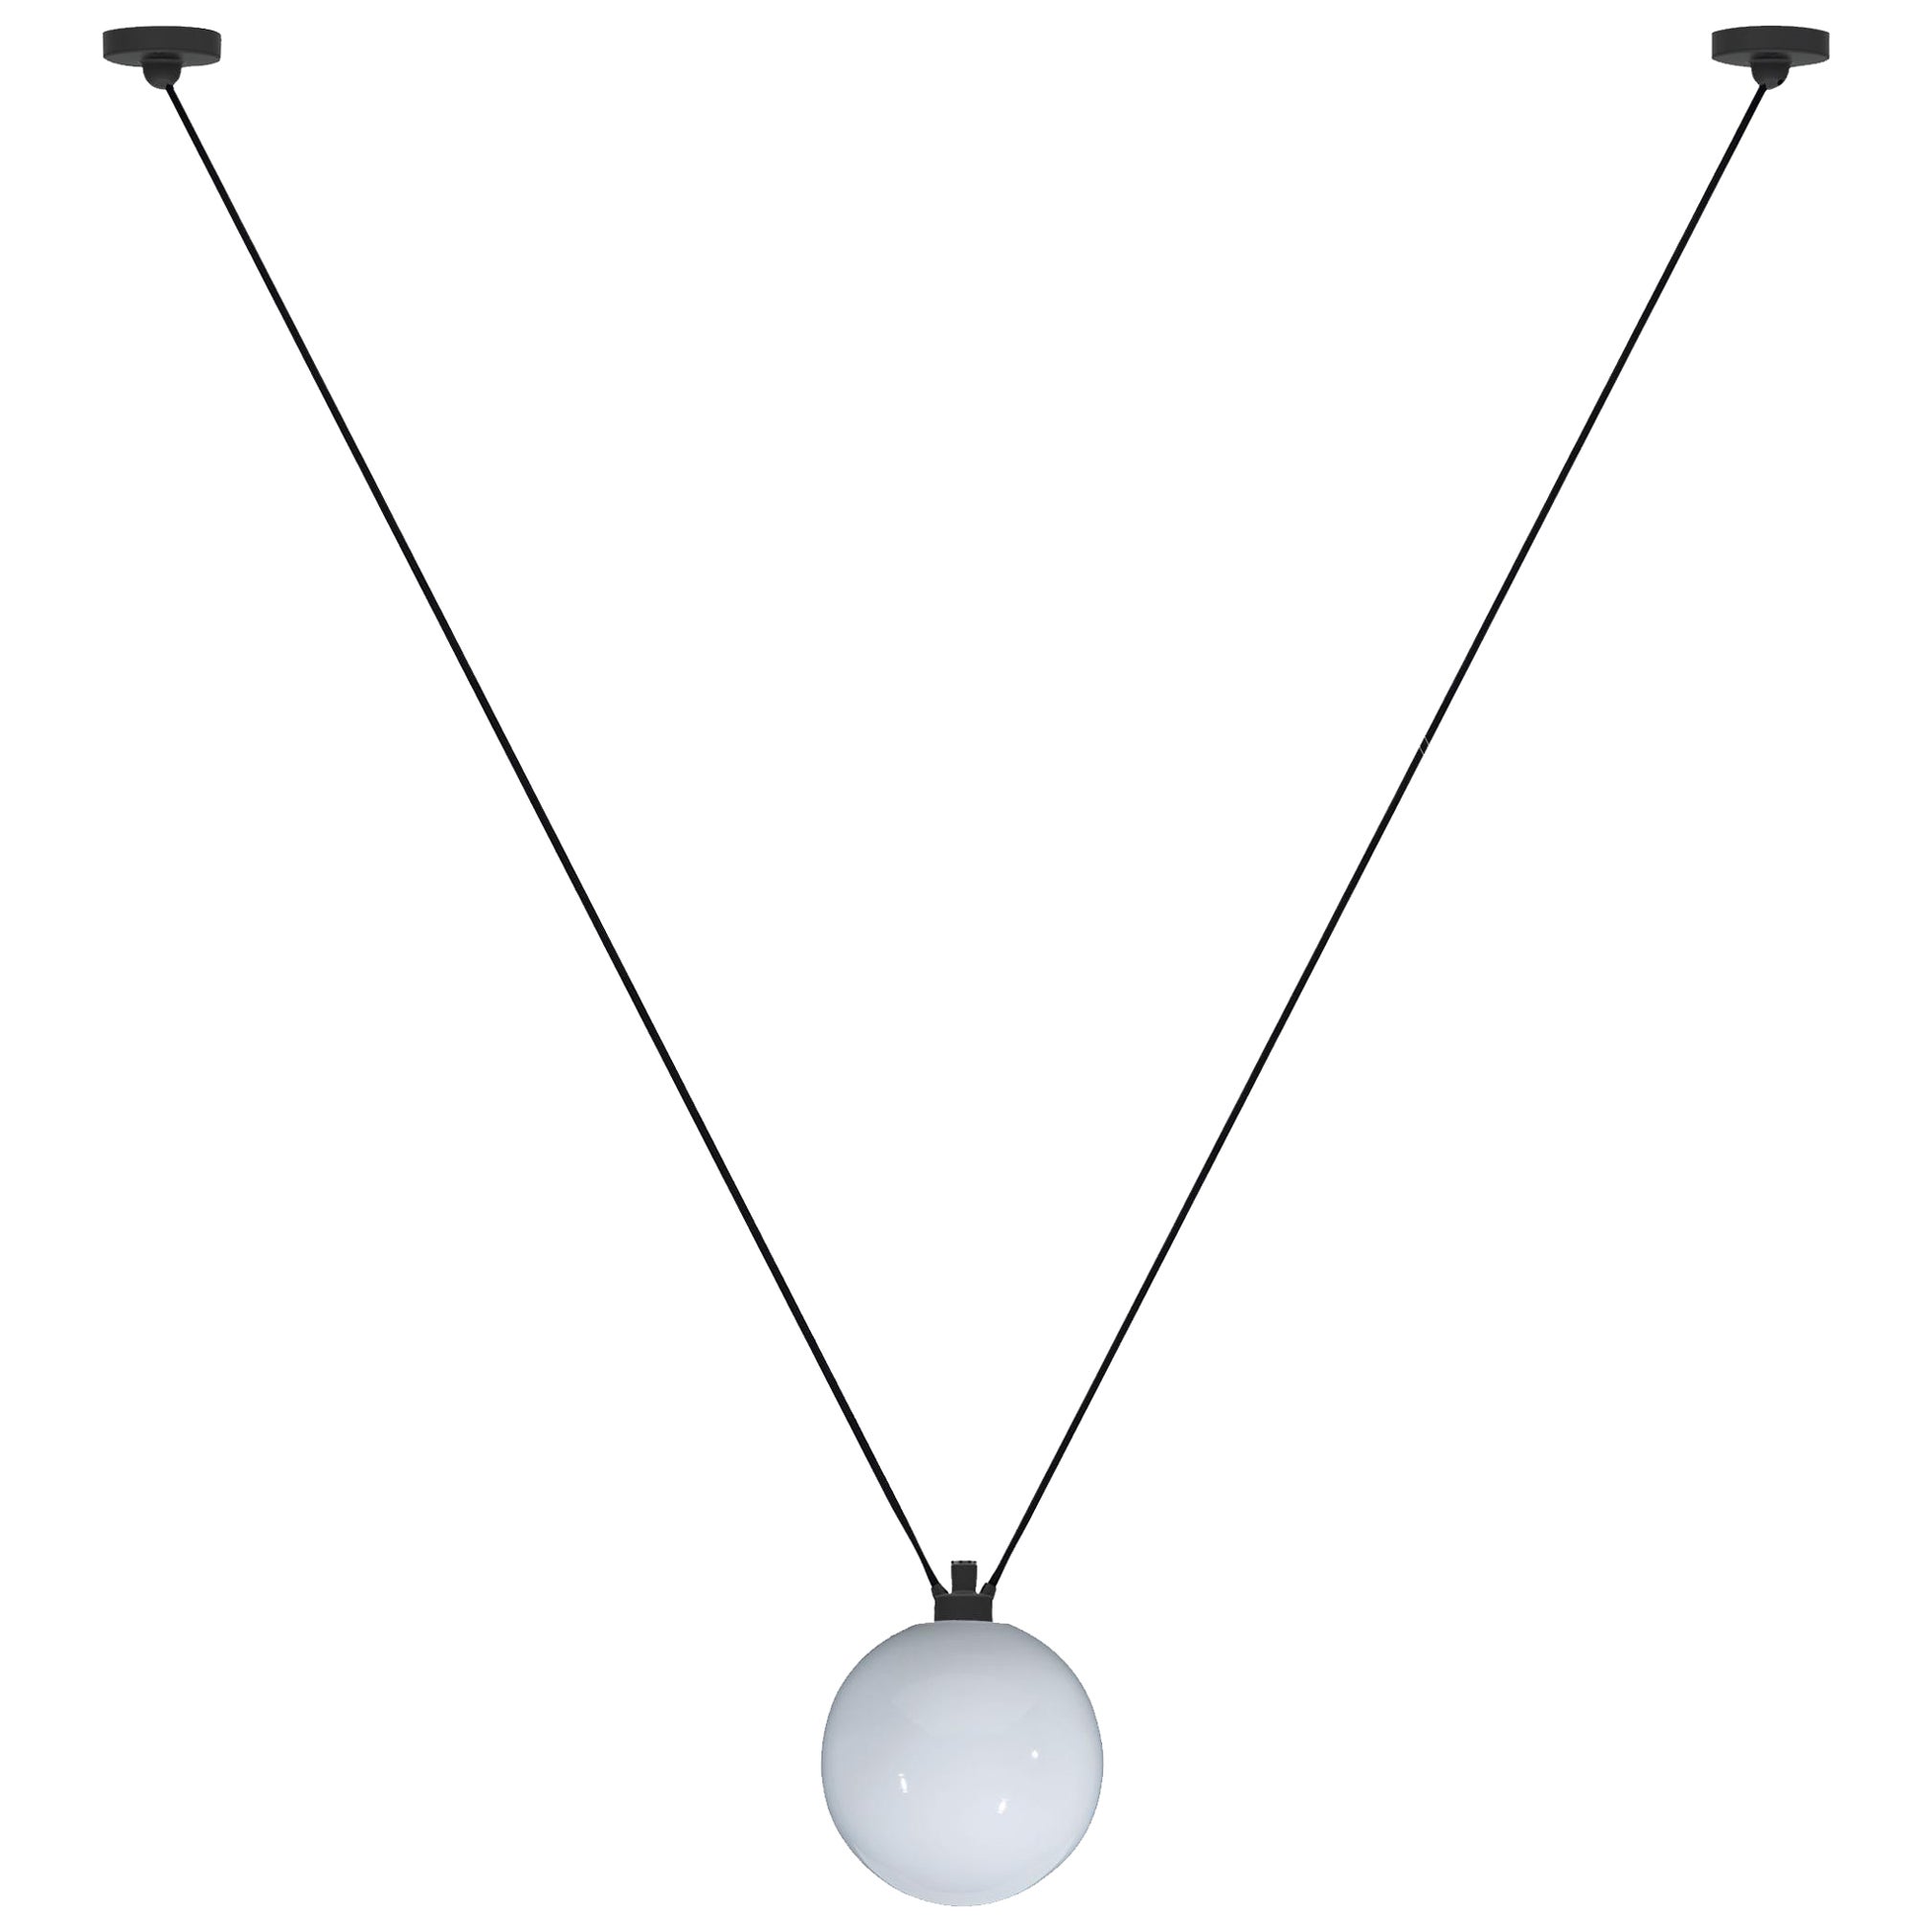 DCW Editions Les Acrobates N°323 Pendant Lamp in Black Arm and Large Glassball For Sale